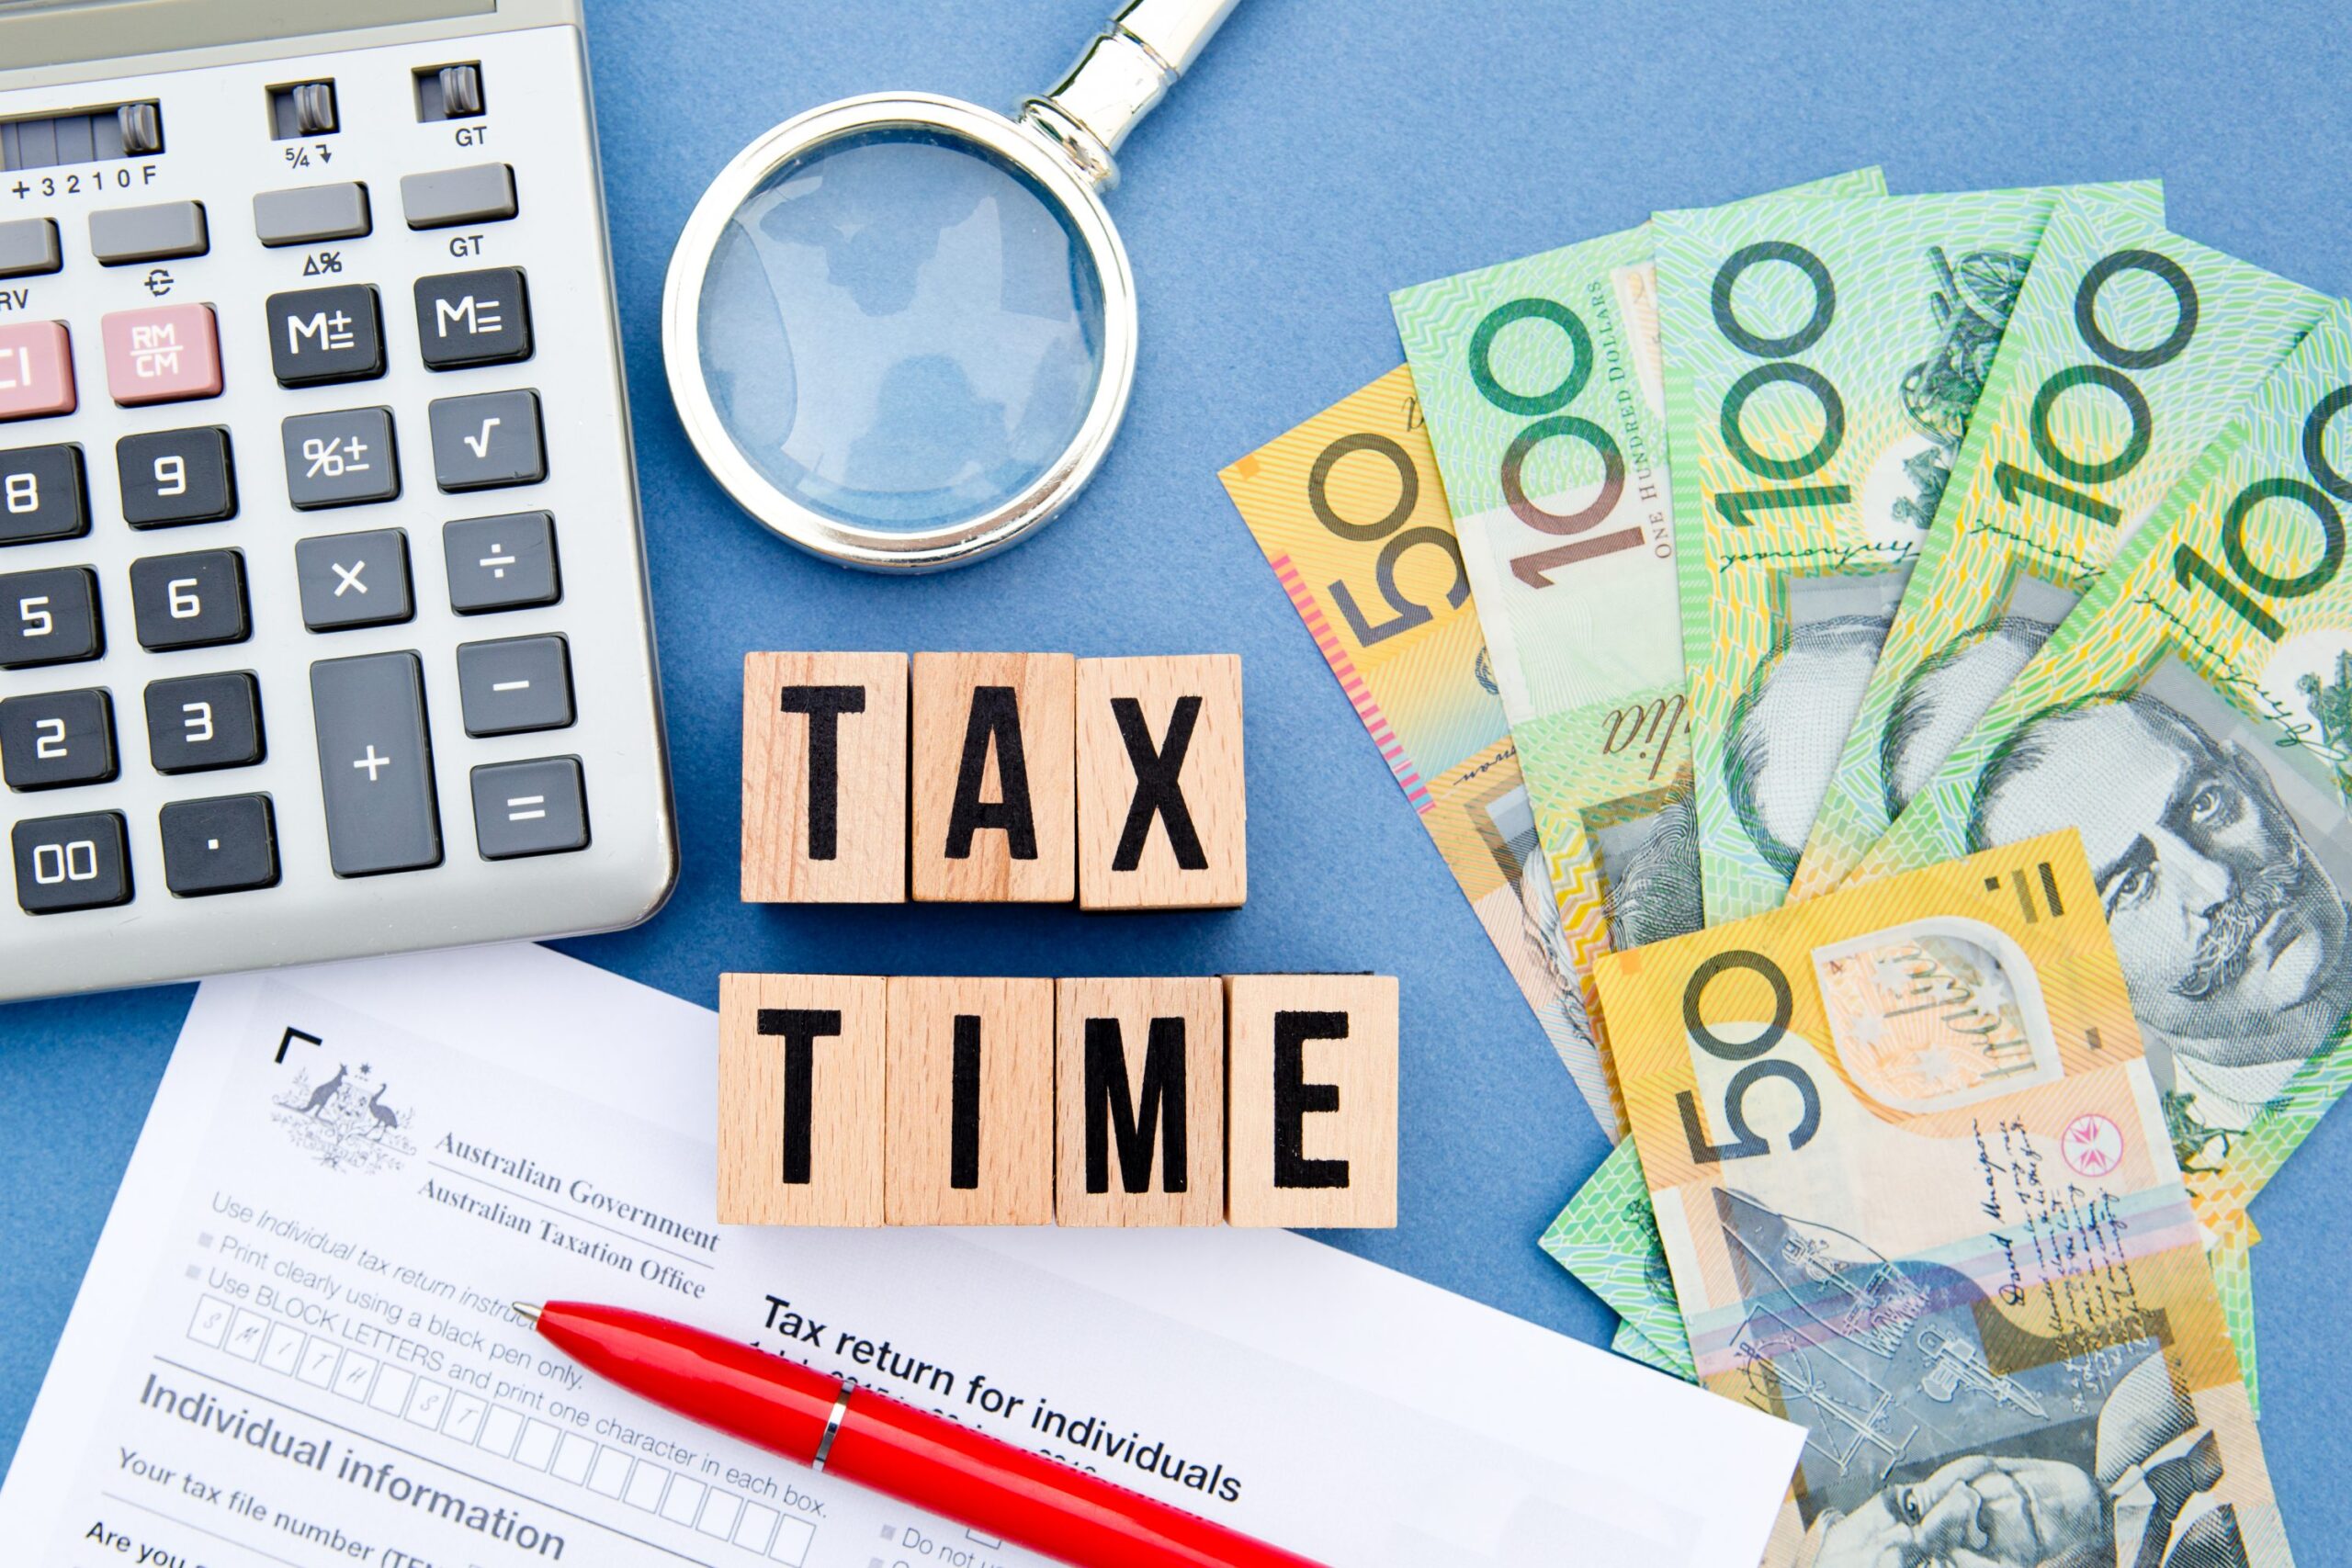 Now’s the time for tax planning